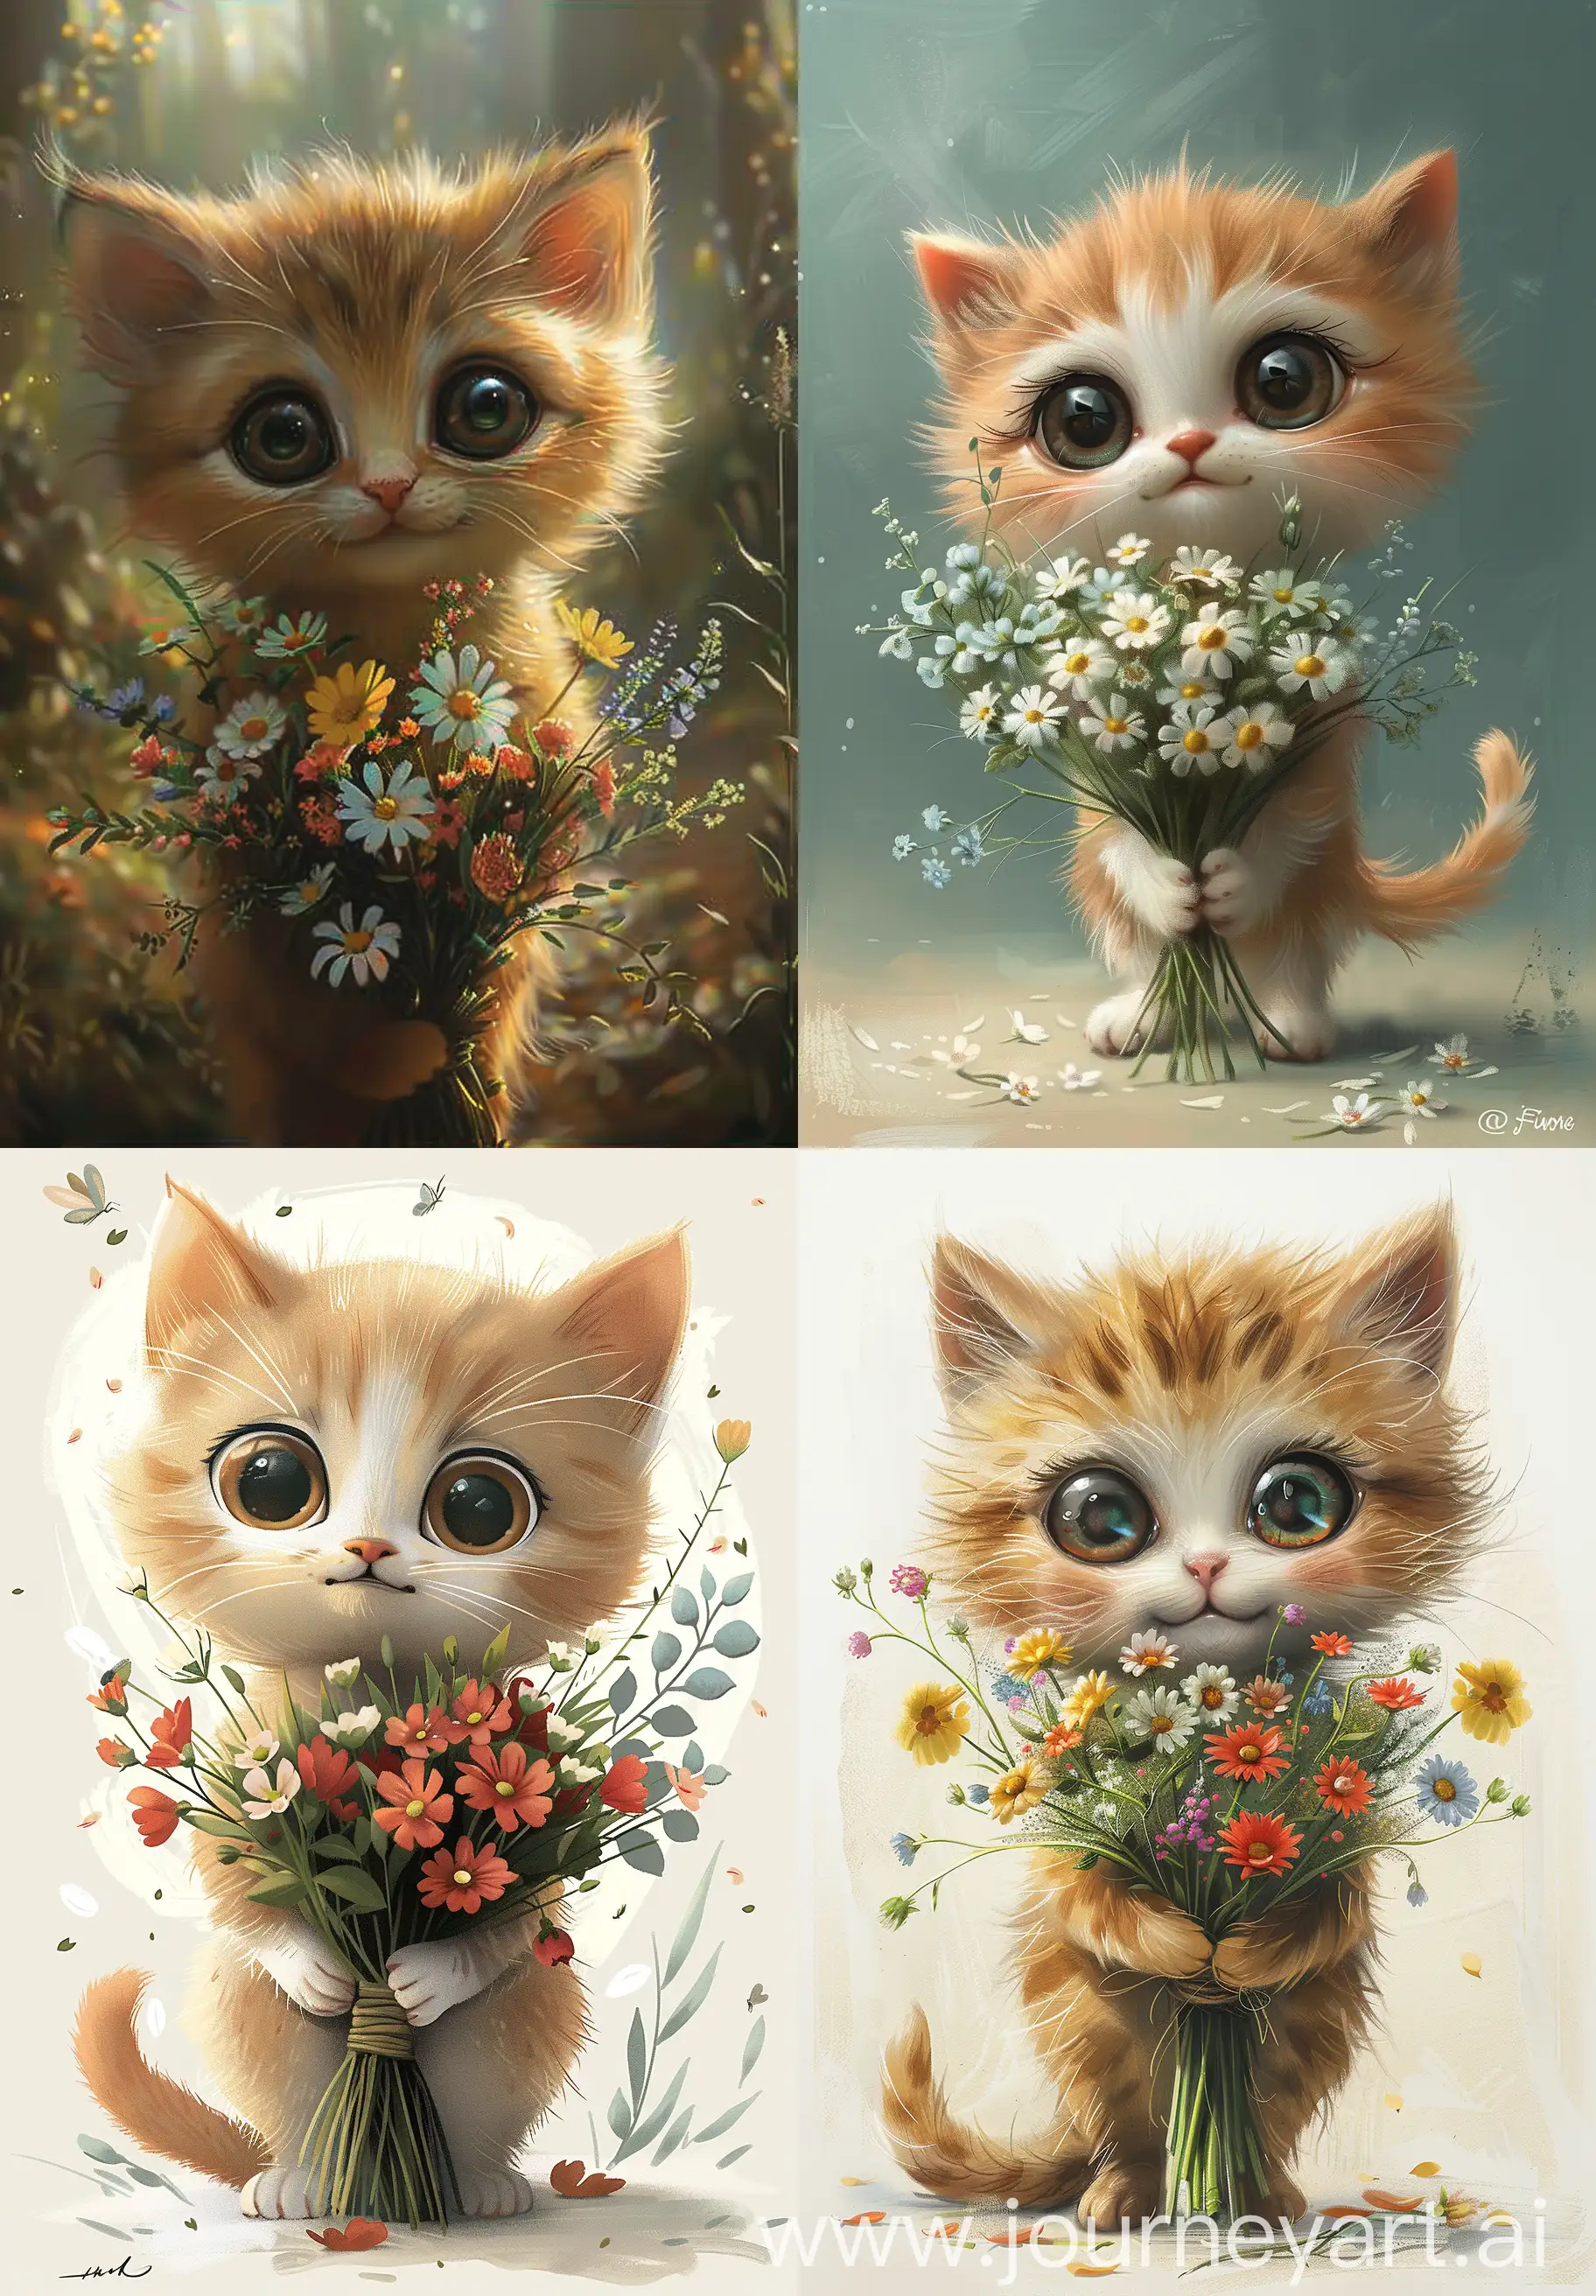 Adorable-Cartoon-Kitten-with-Spring-Flowers-Bouquet